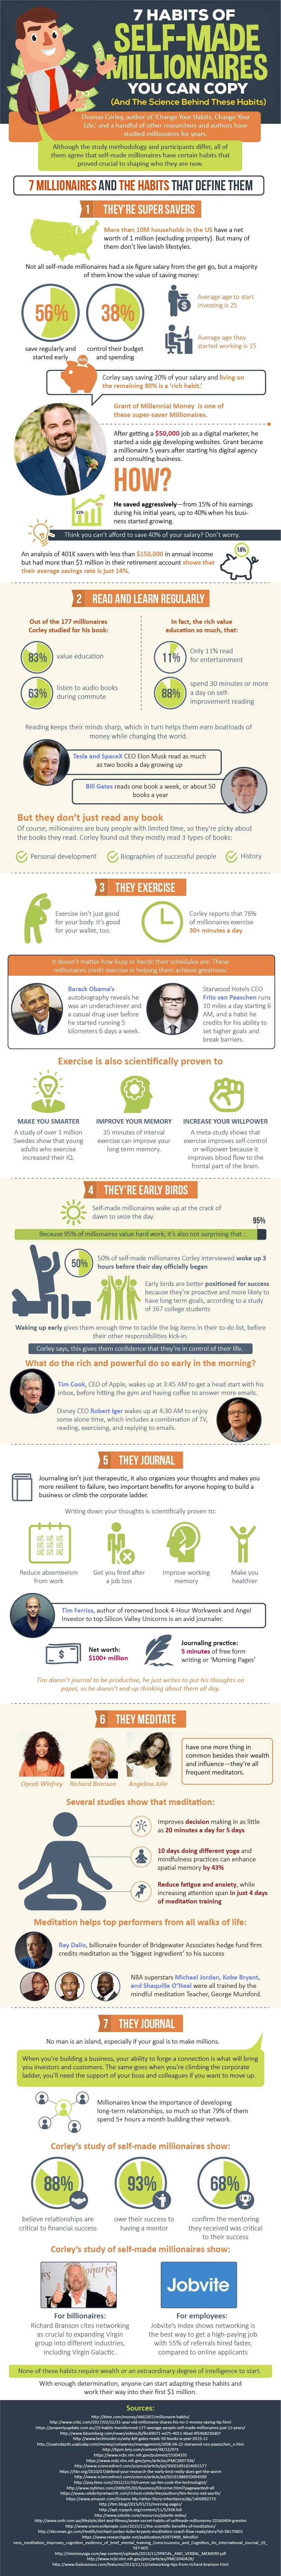 7 Habits Of Self-Made Millionaires You Can Copy (And The Science Behind These Habits) - #infographic